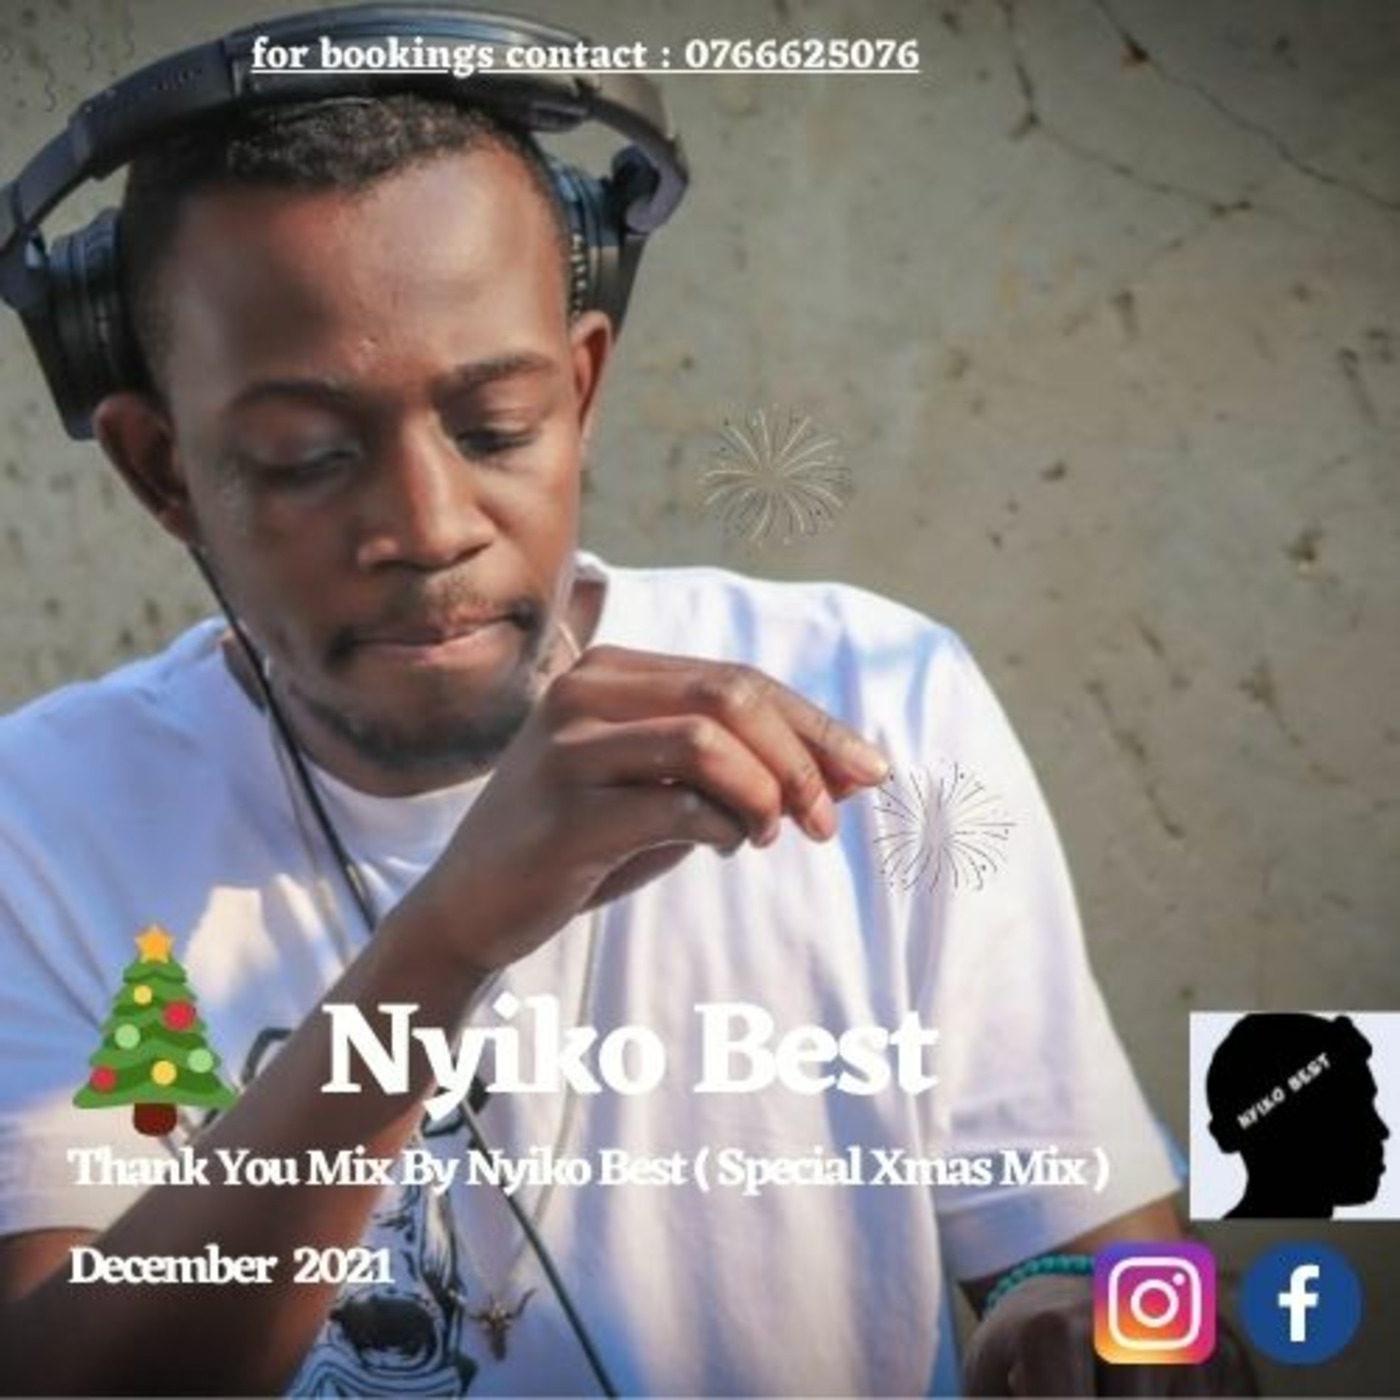 Thank You Mix By Nyiko Best ( Special Xmas Mix ) December